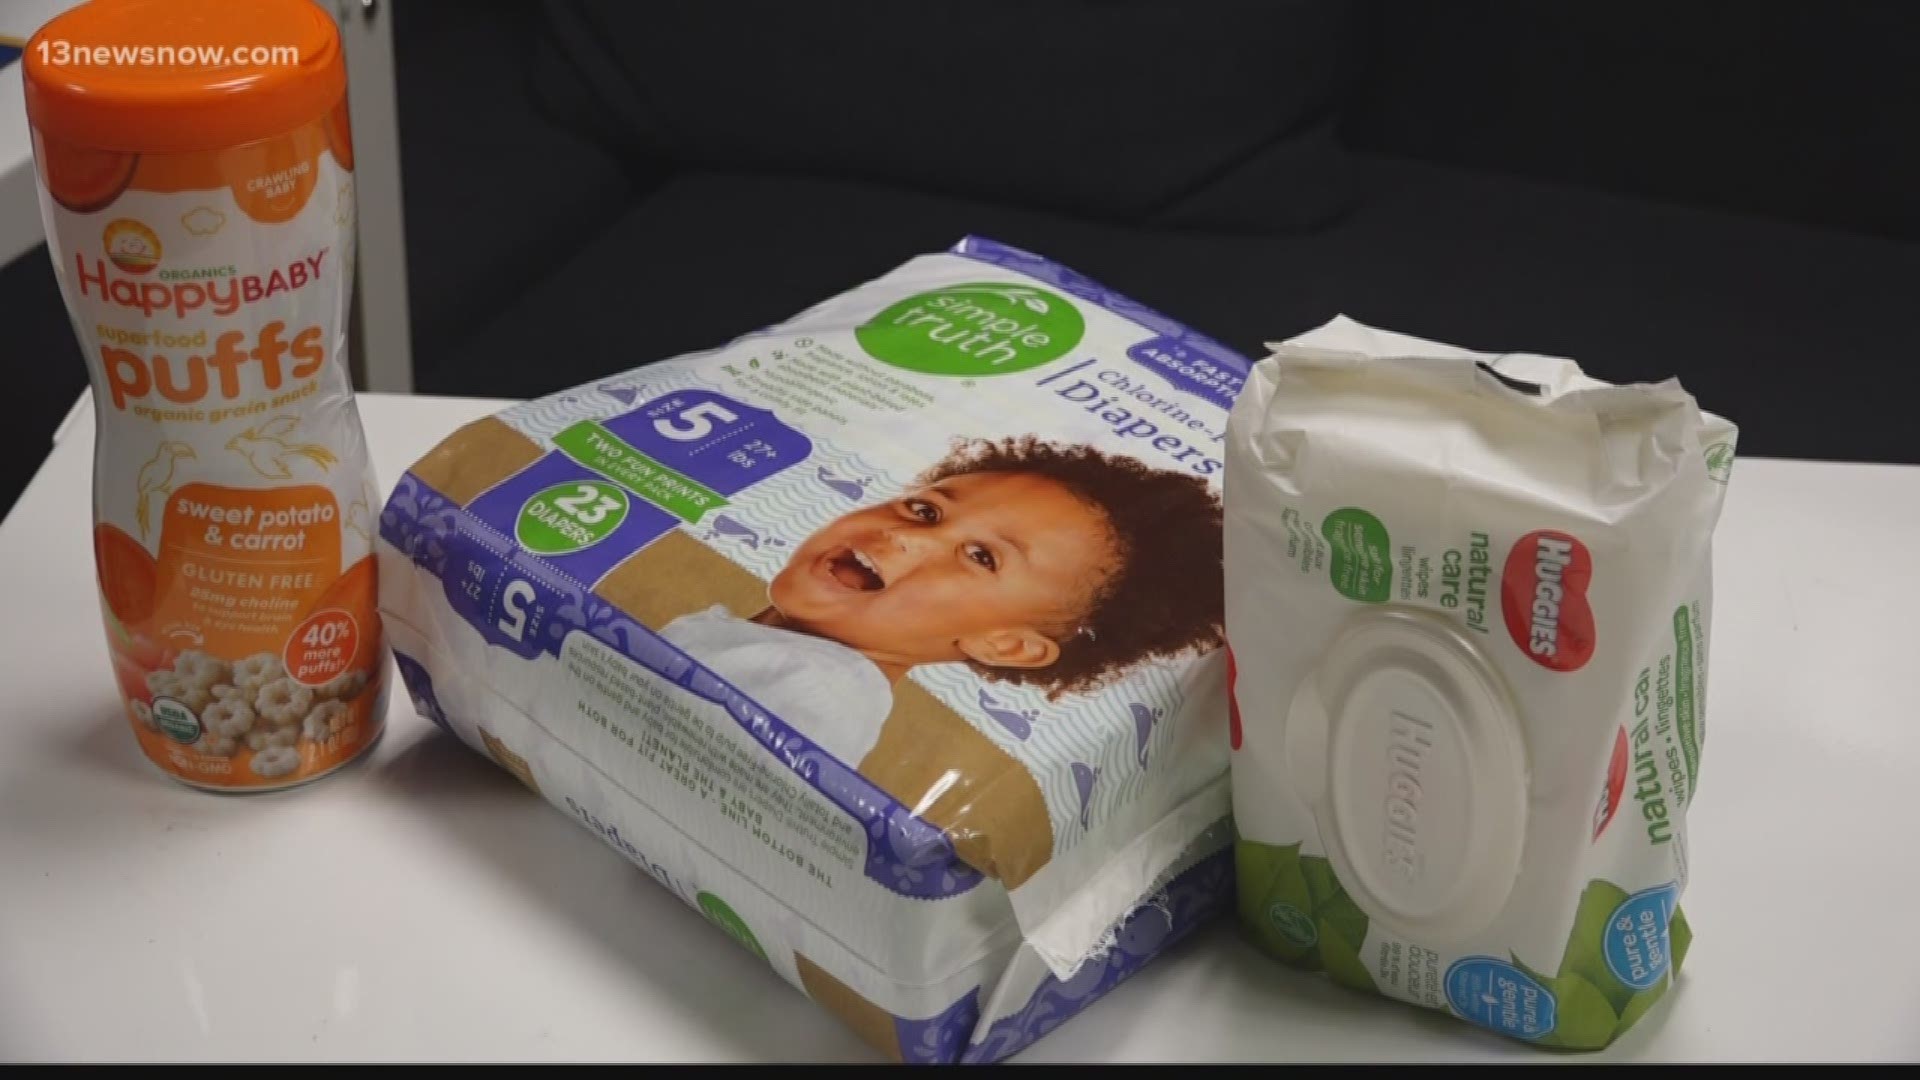 There are two baby pantries that are helping furloughed workers during the shutdown, but they need donations to stay stocked.